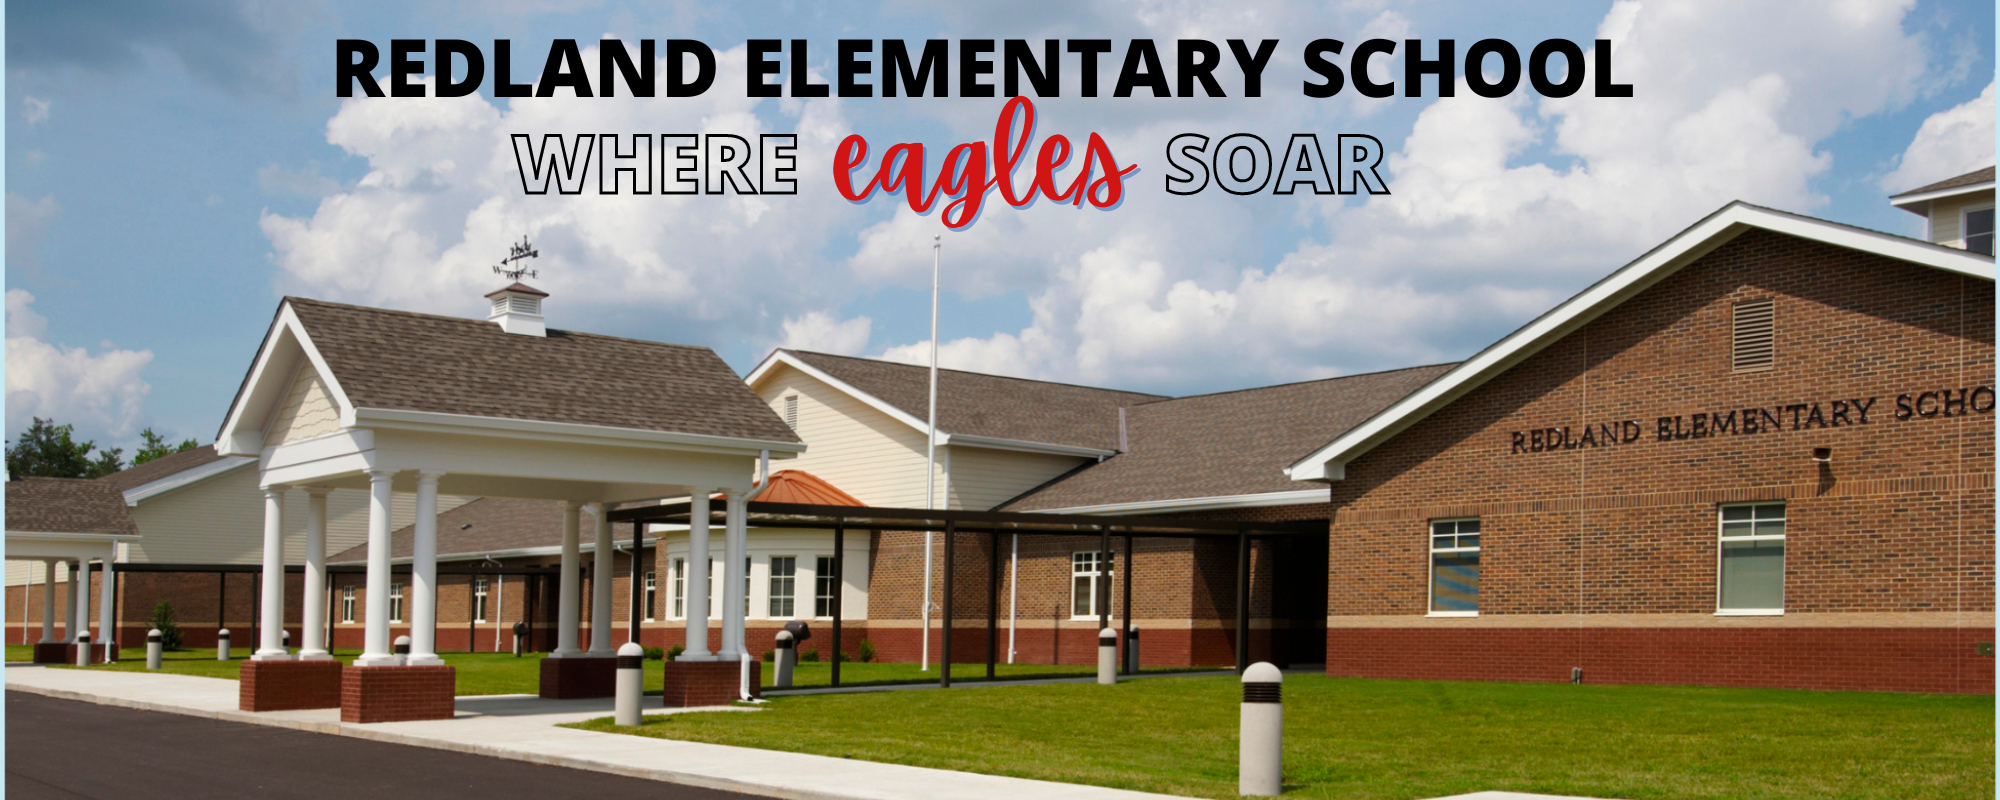 Redland Elementary School Where Eagle Soar with picture of school